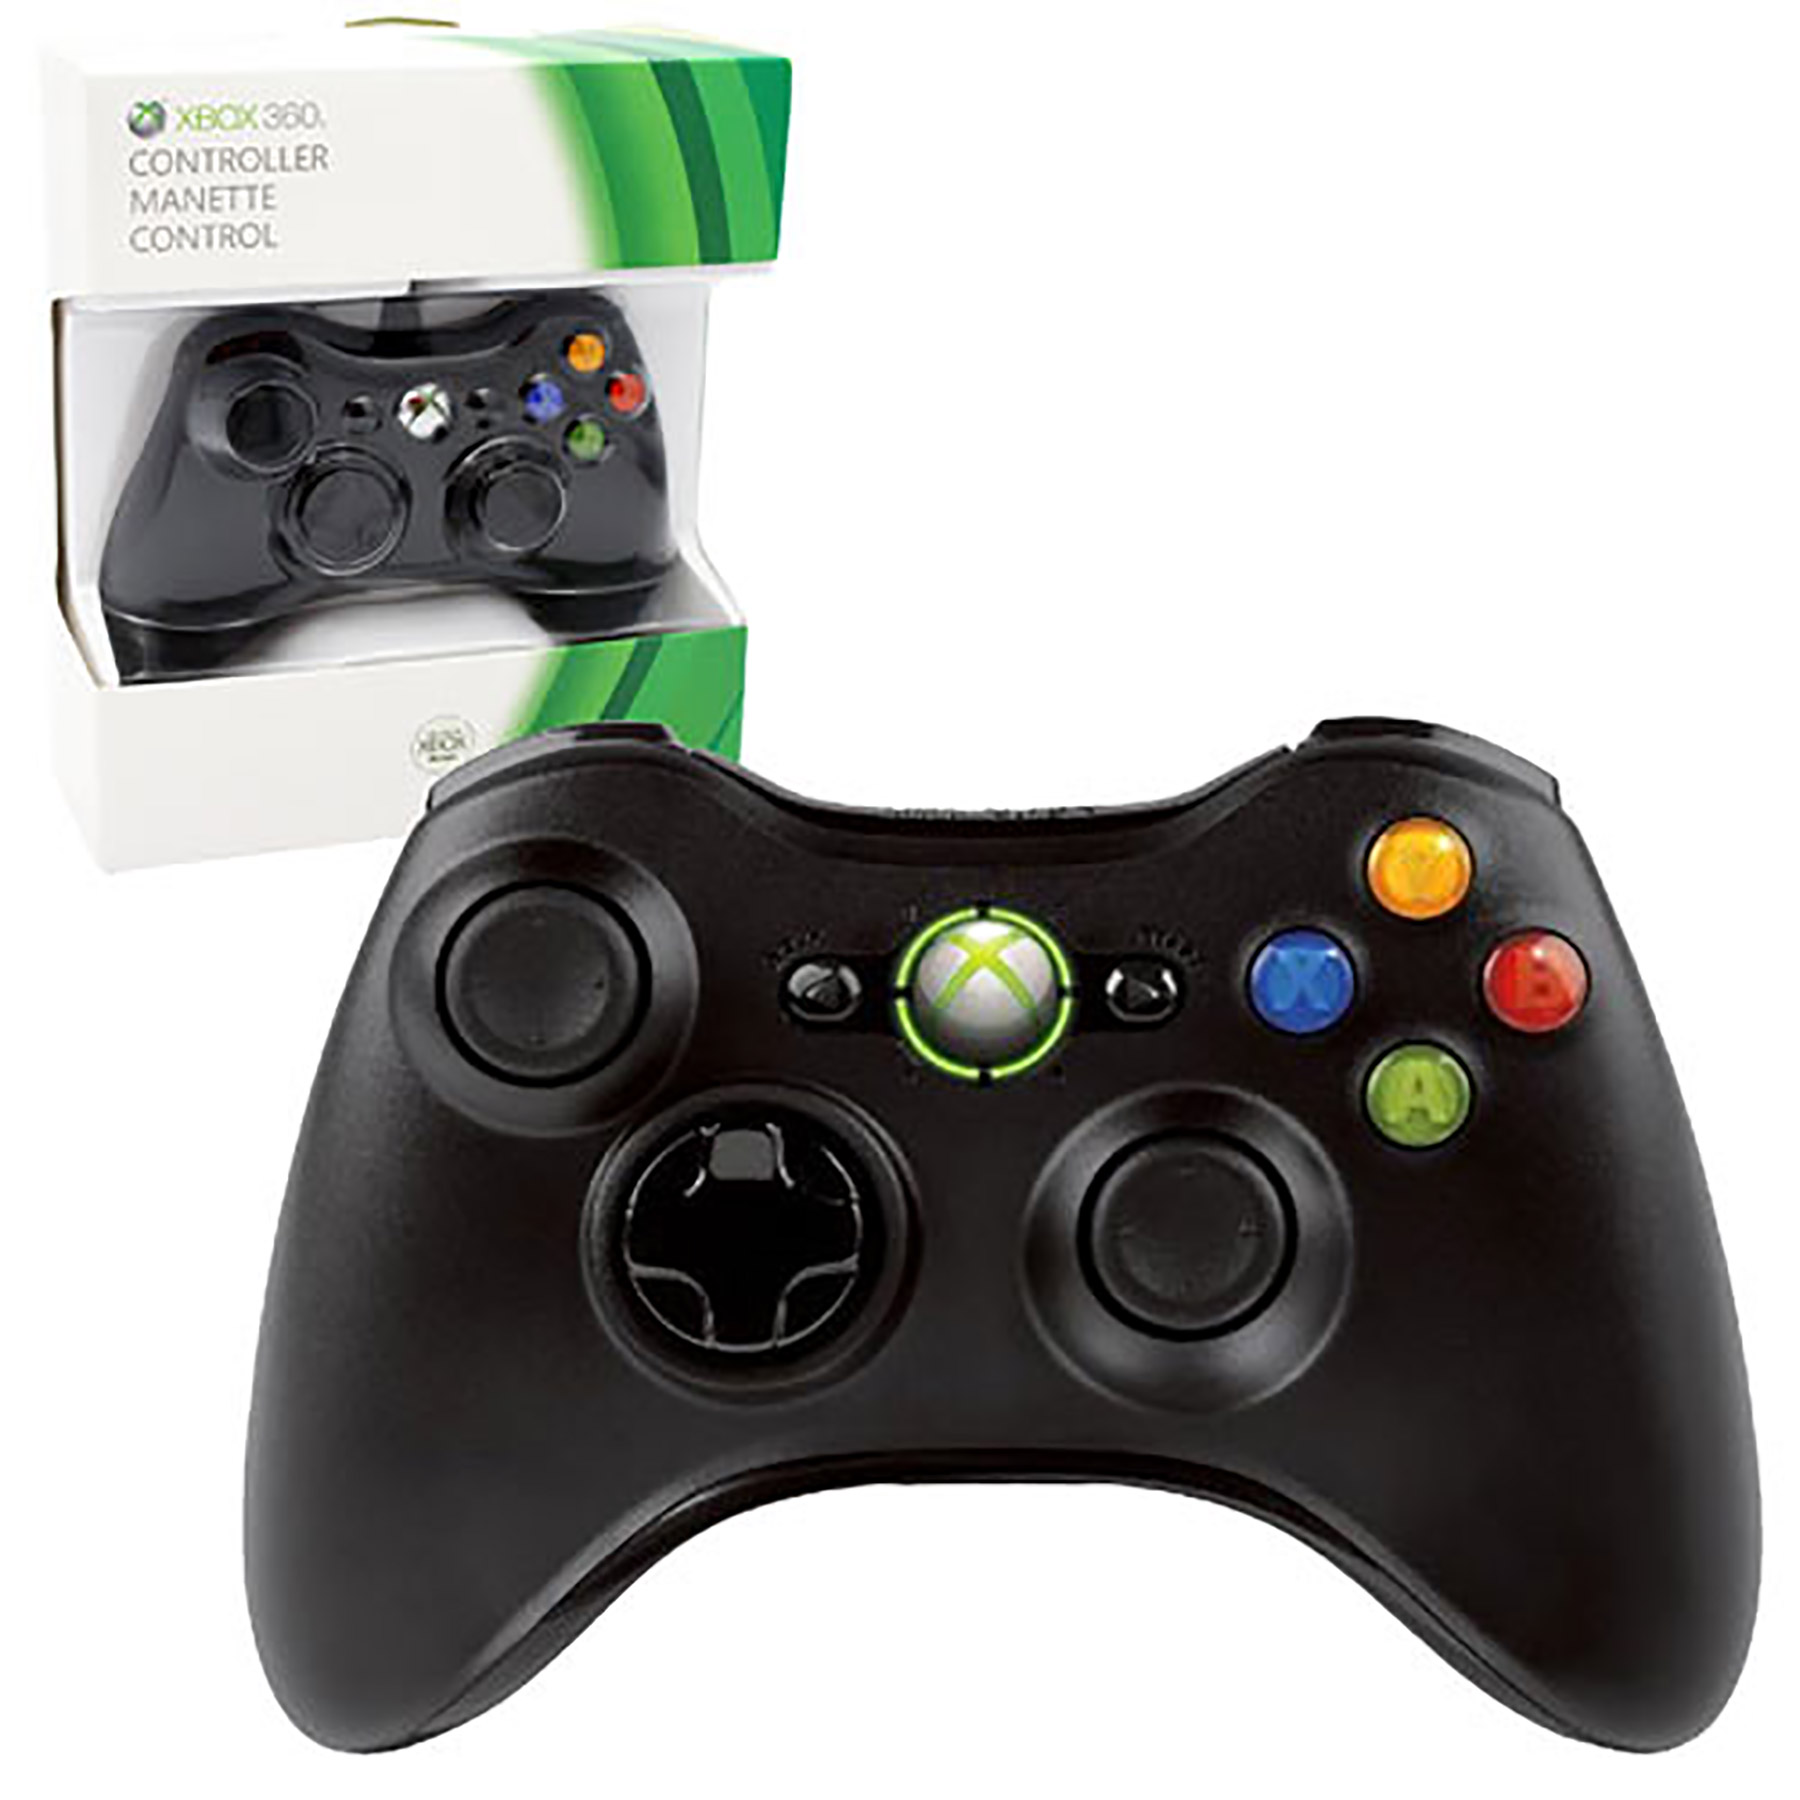 New xbox 360 wired controller